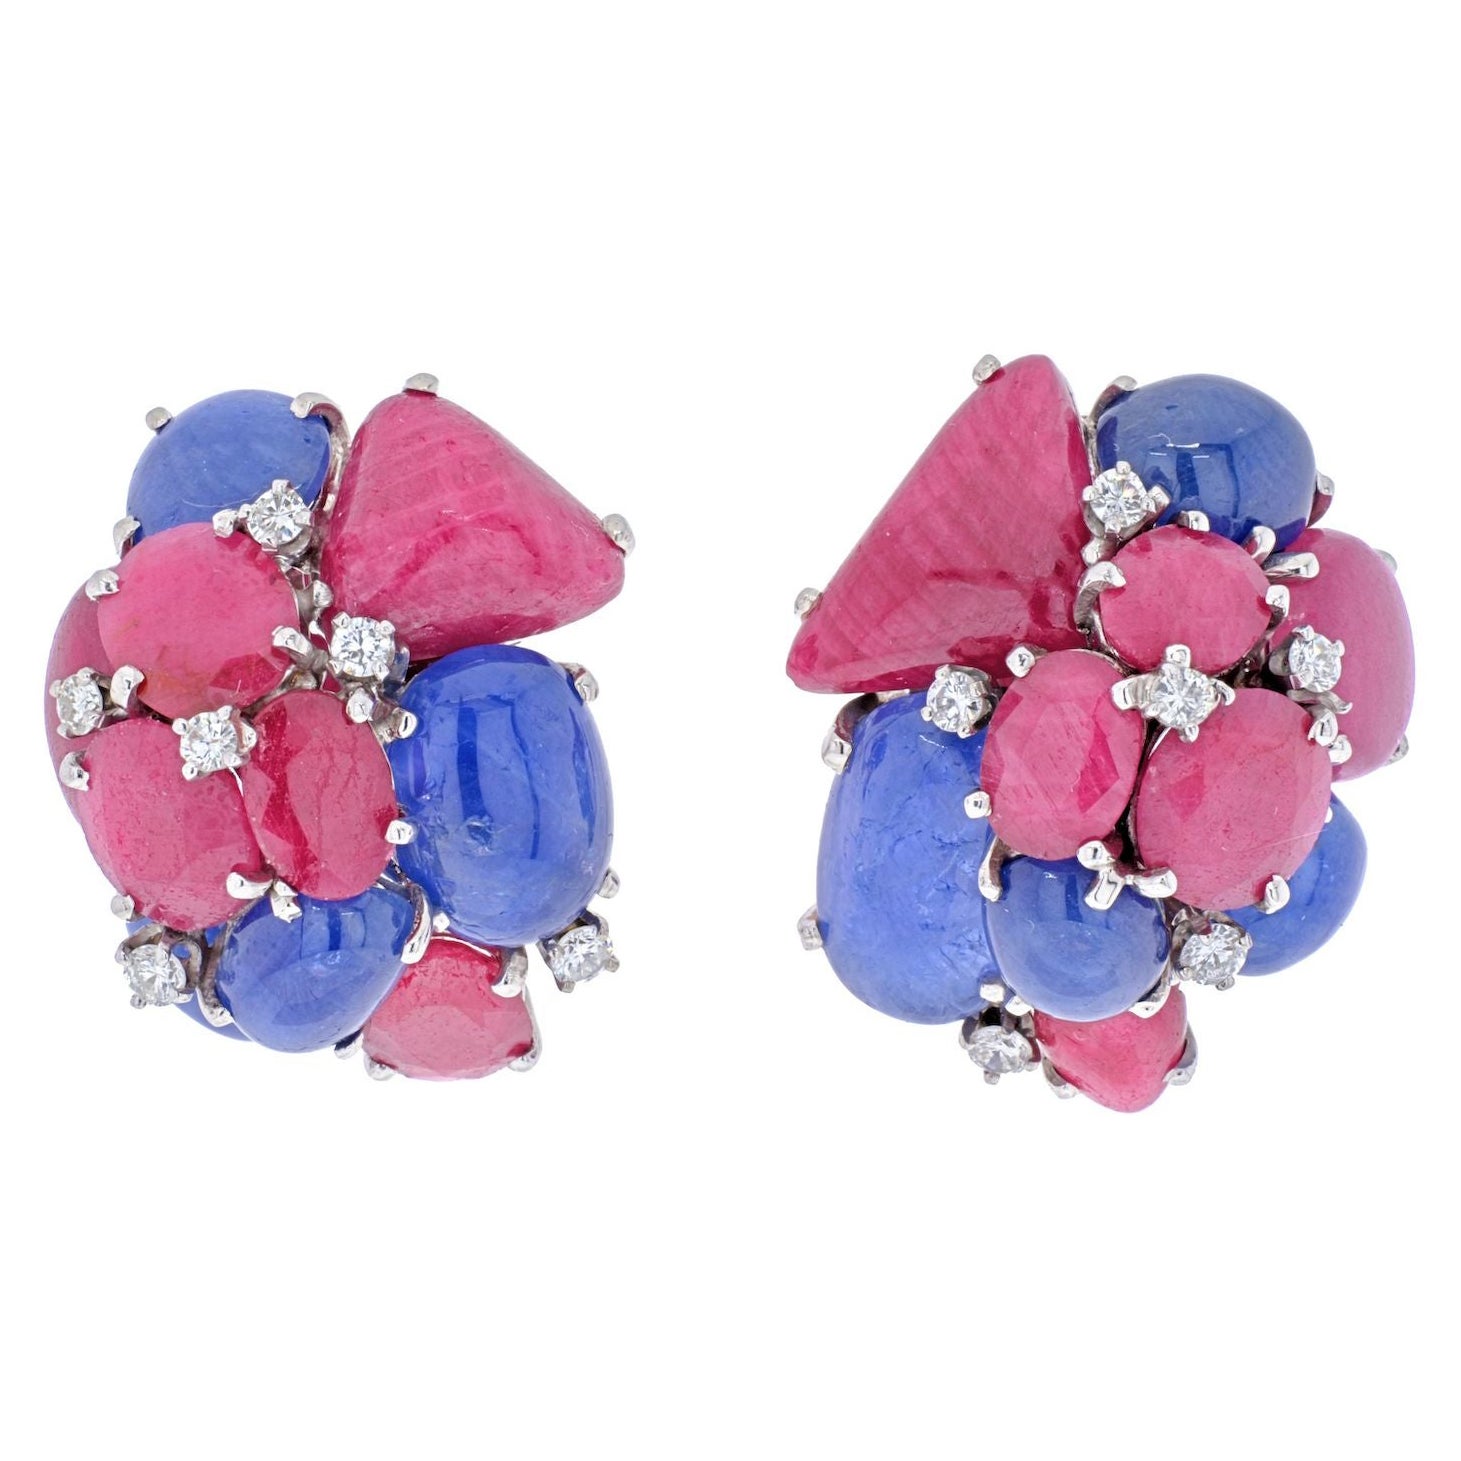 Seaman Schepps 14K White Gold Cluster Sapphire and Ruby Earrings